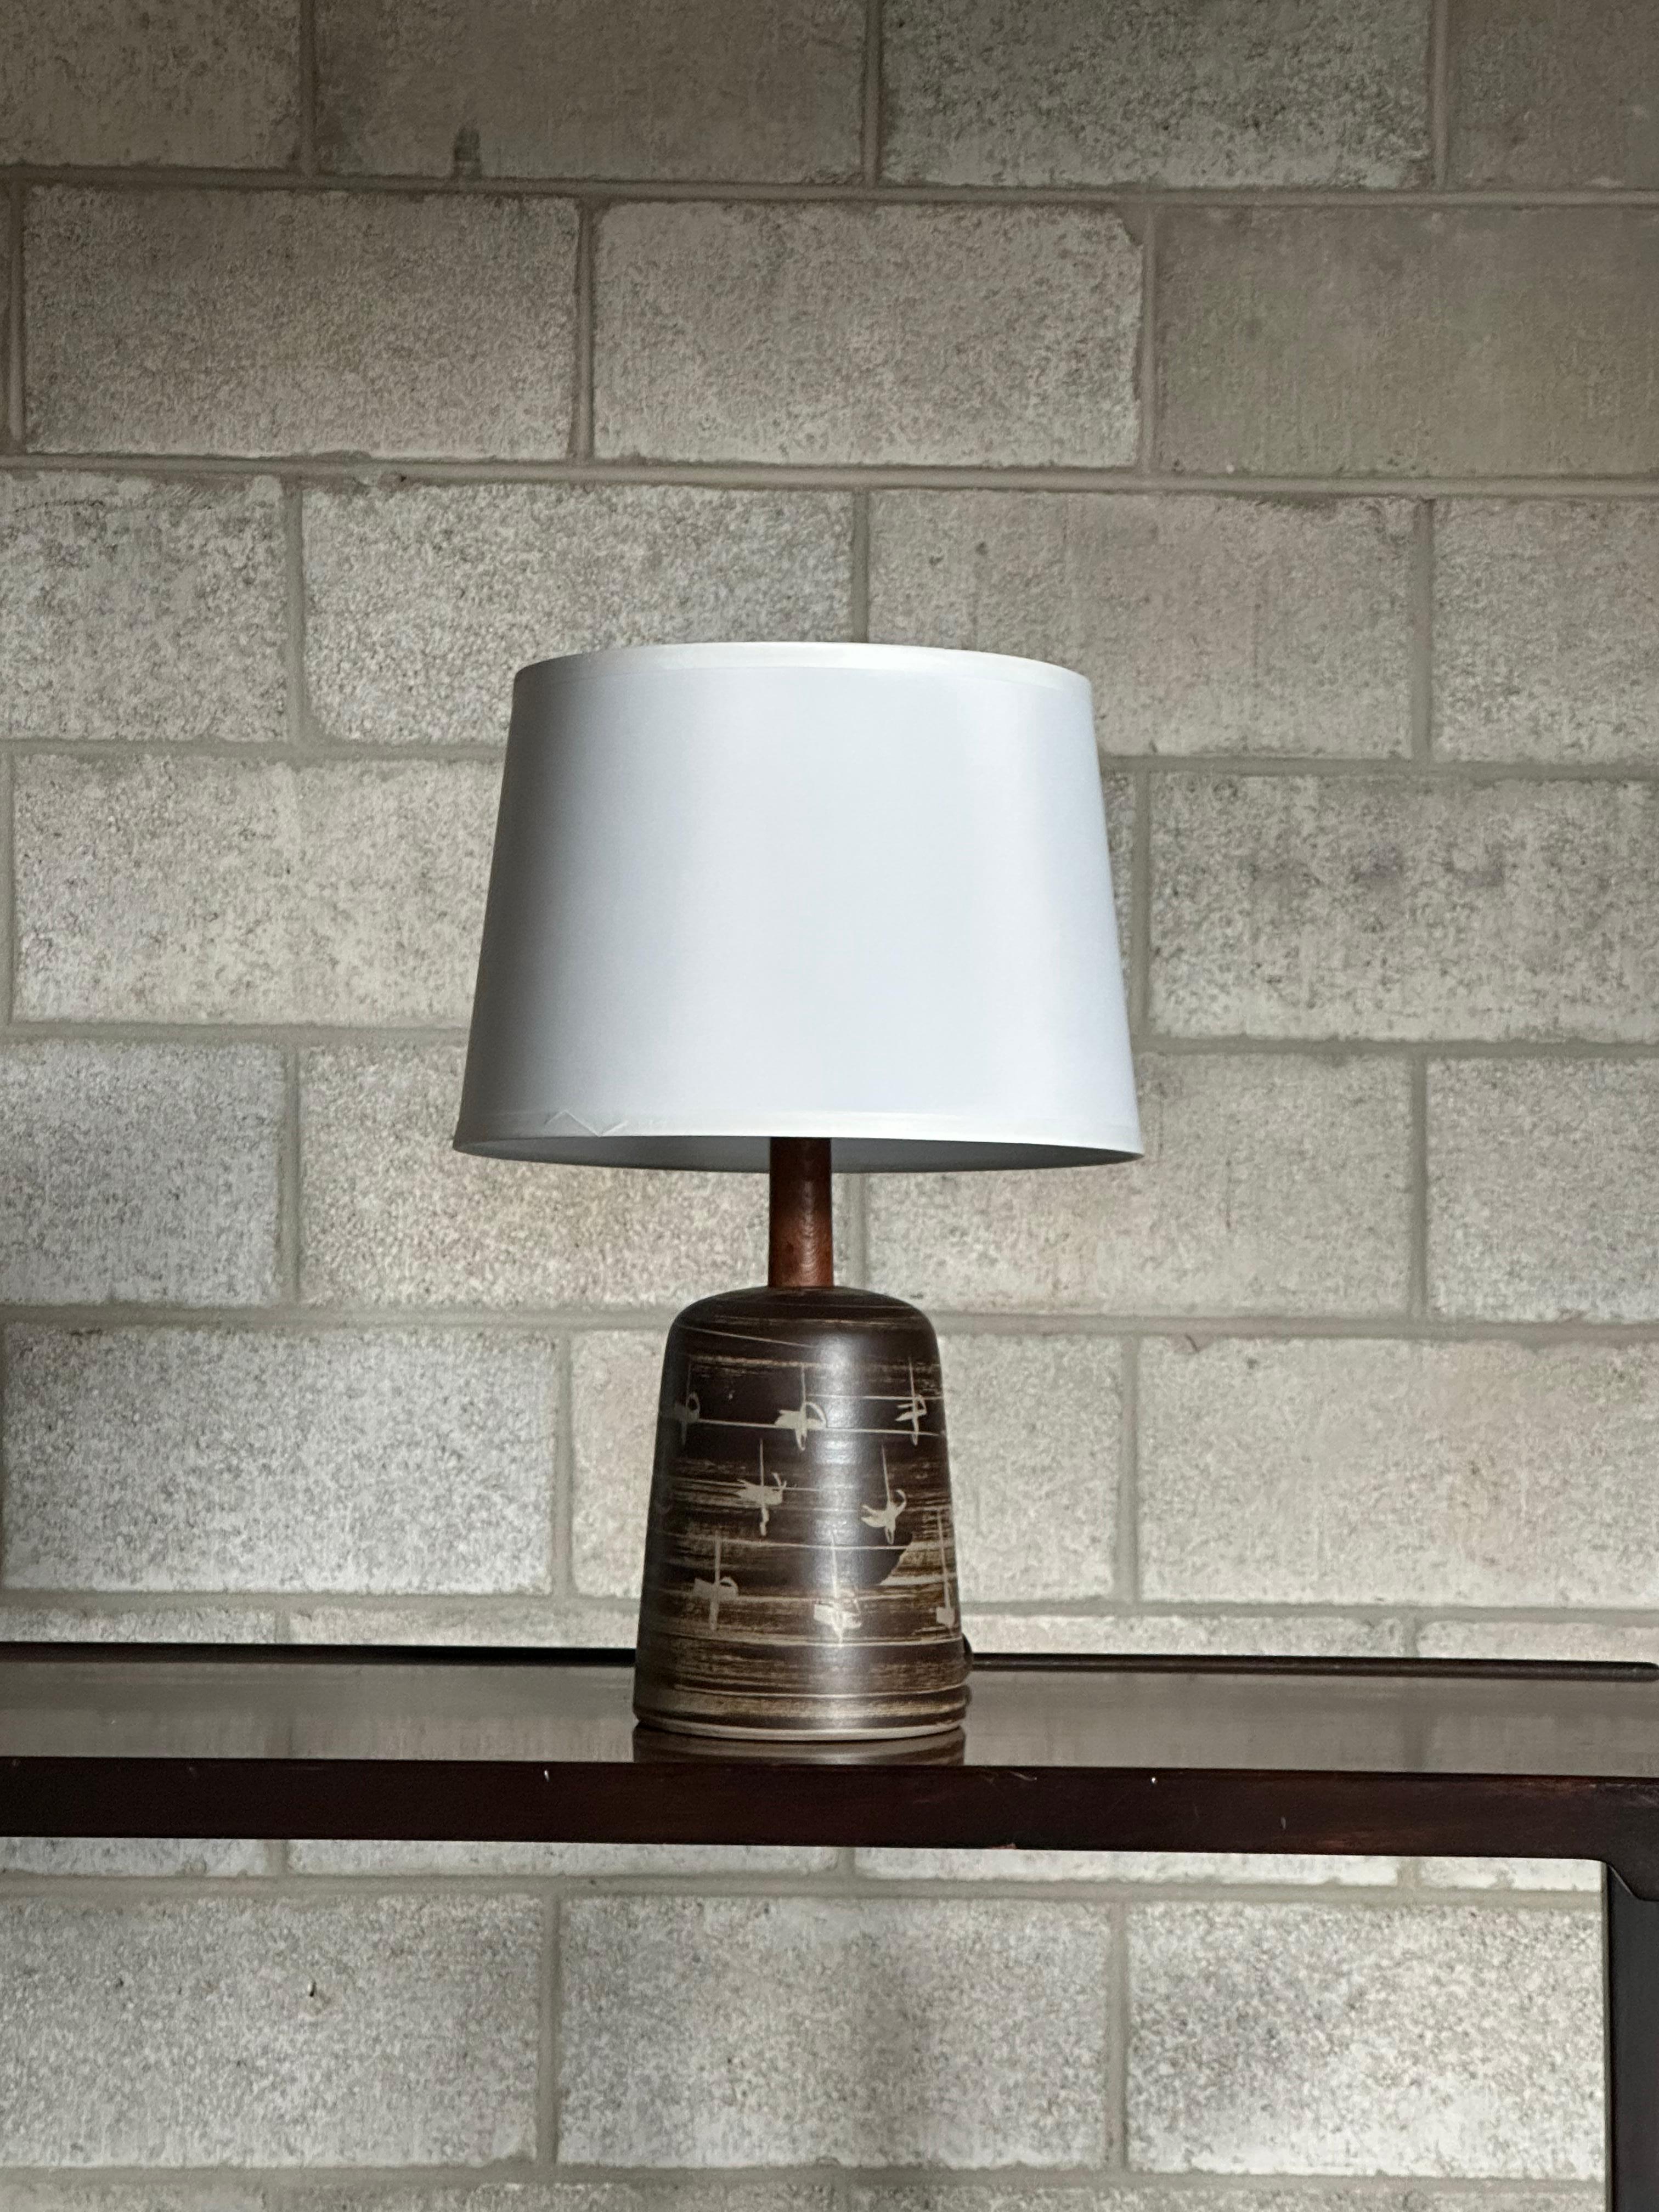 Table lamp designed by Jane and Gordon Martz for Marshall Studios. Featuring a ceramic body, accented with a long walnut neck, and finished with a walnut finial. 

Overall Dimension
20.5” tall
13” wide with shade

Ceramic only dimensions 
8.5